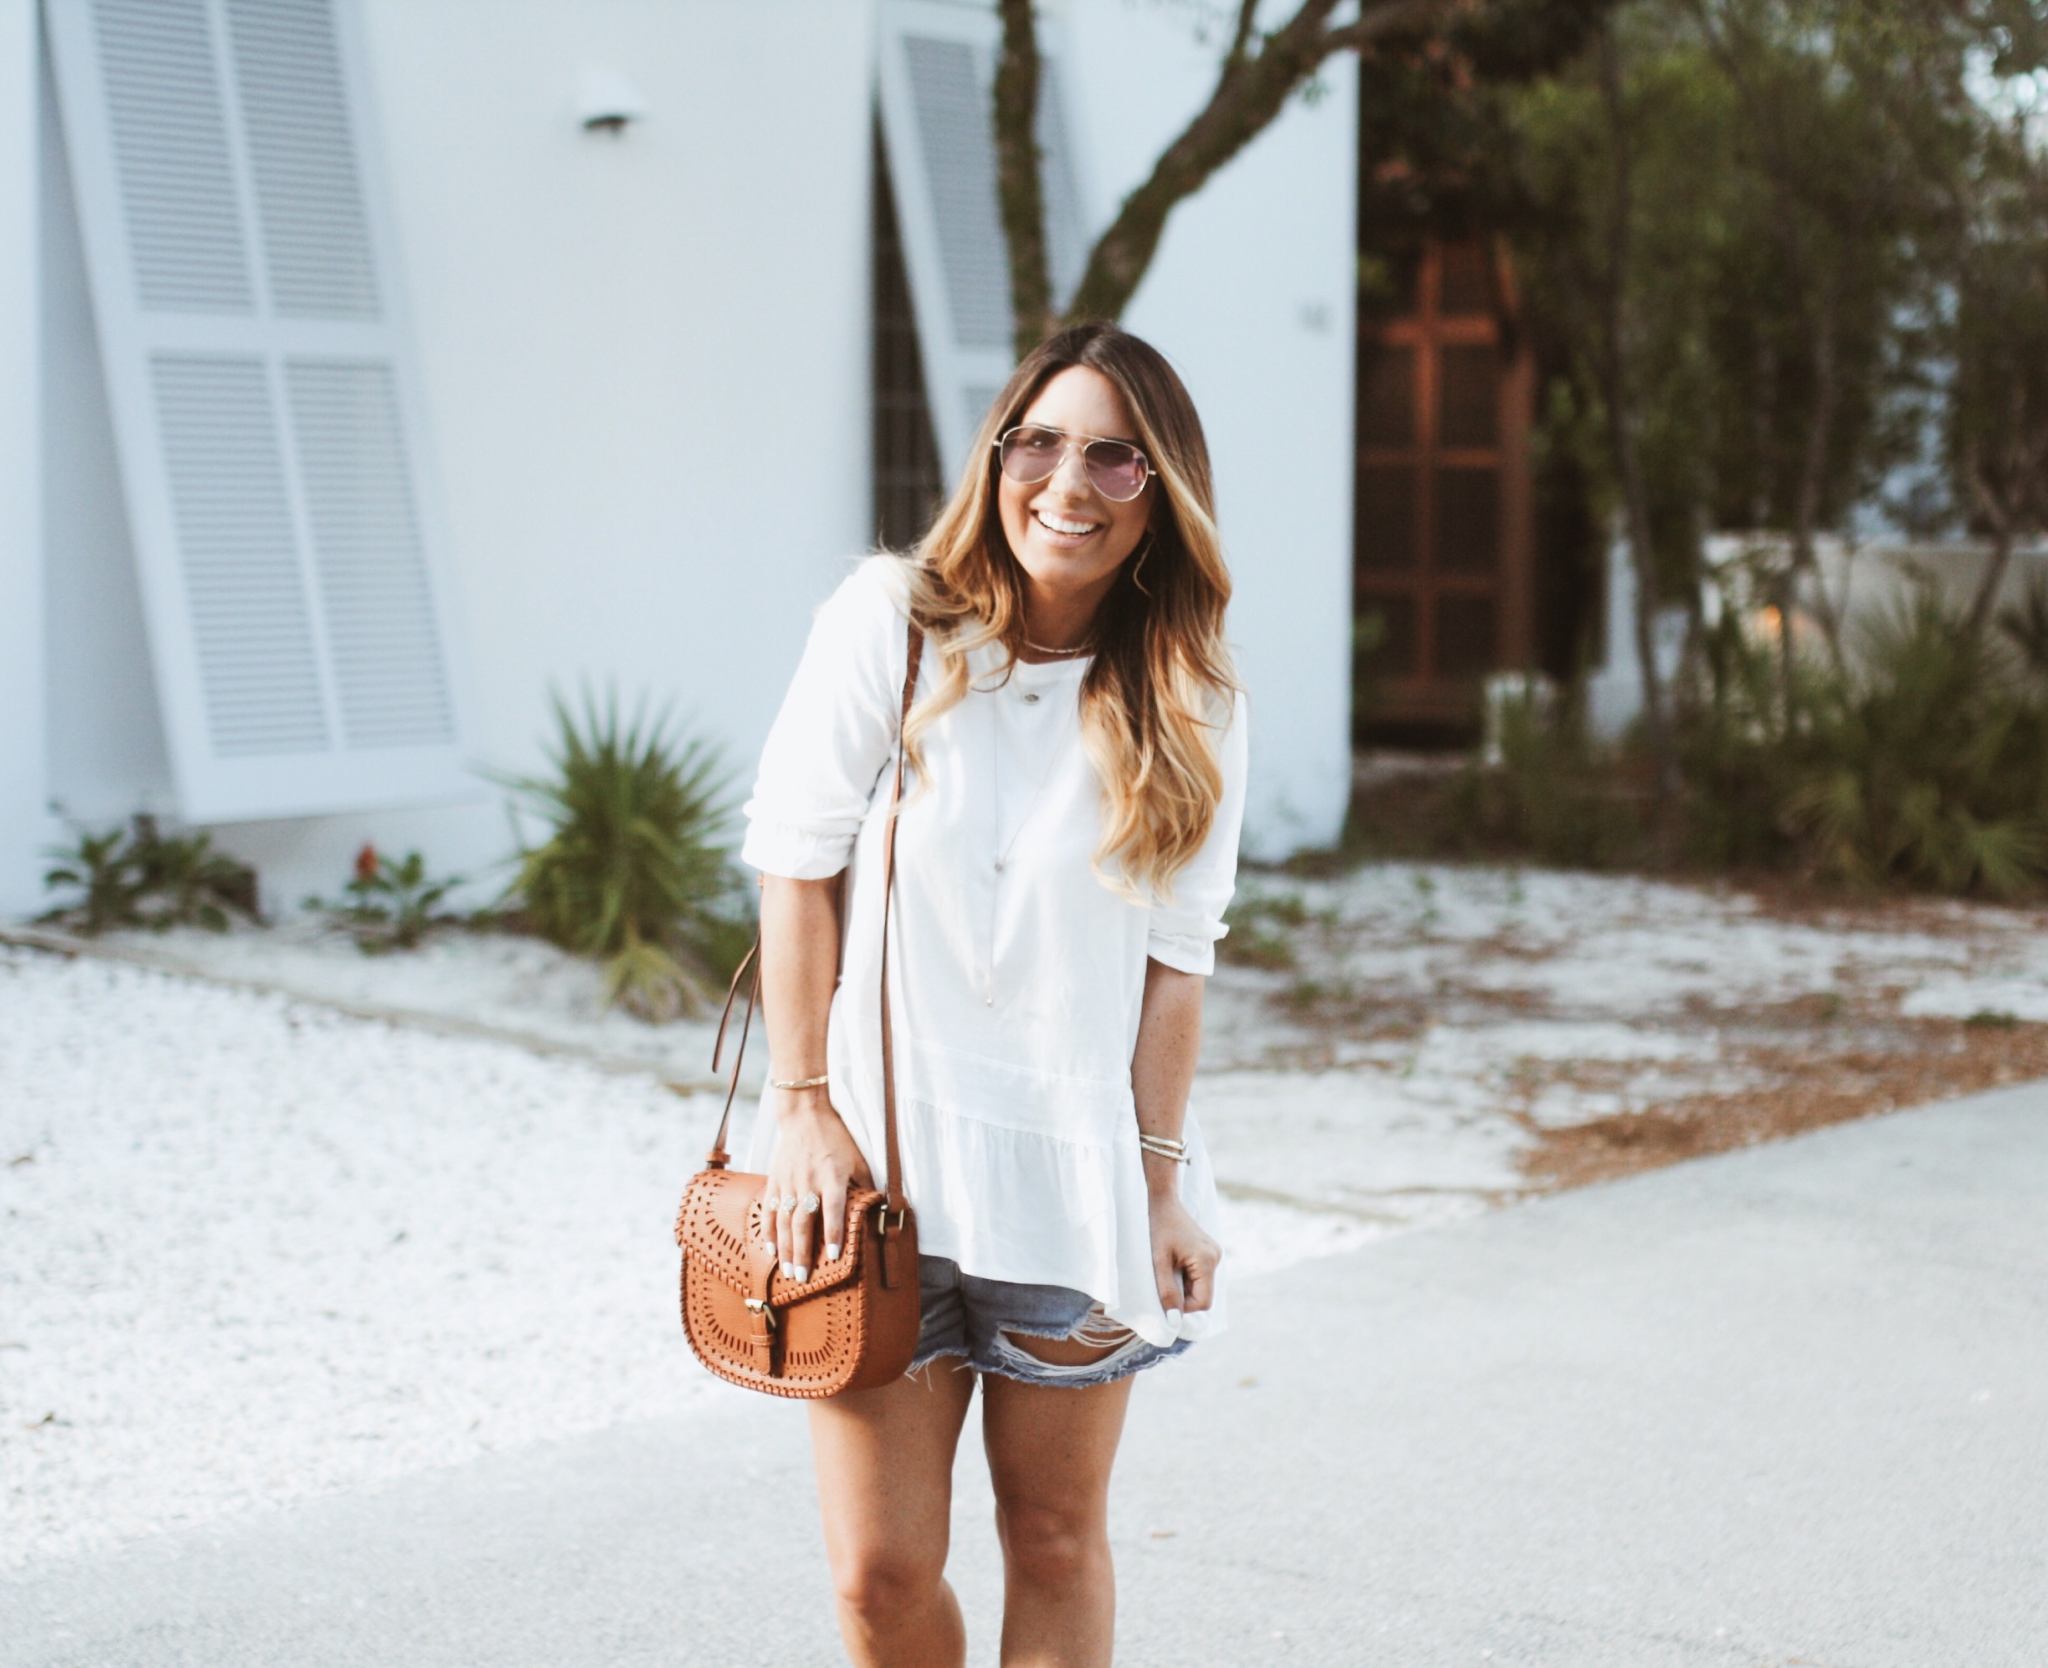 Can never go wrong with the basics. Rounded up my favorite white tops and denim shorts. Read more to check out my favorites.